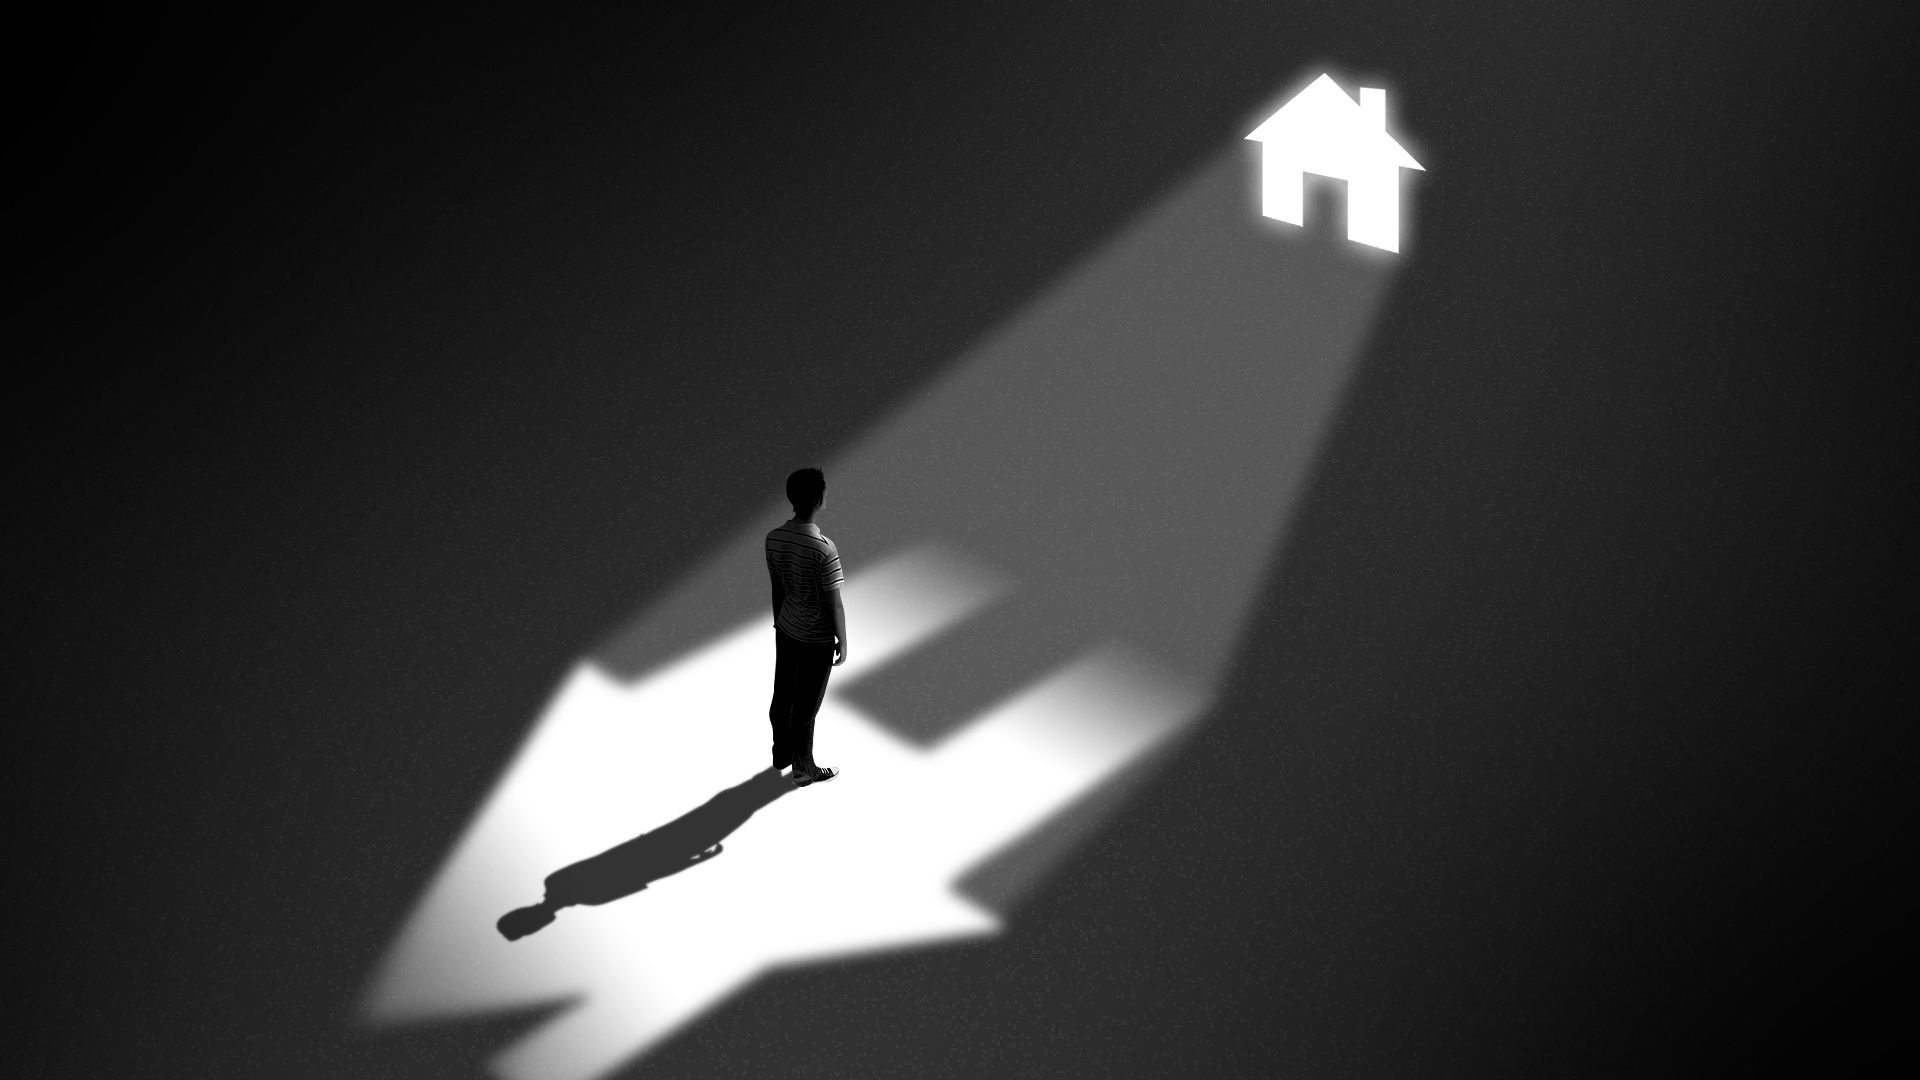 Illustration of a man standing in a dark cell looking up towards a tiny window in the shape of a house casting light inside his cell. 